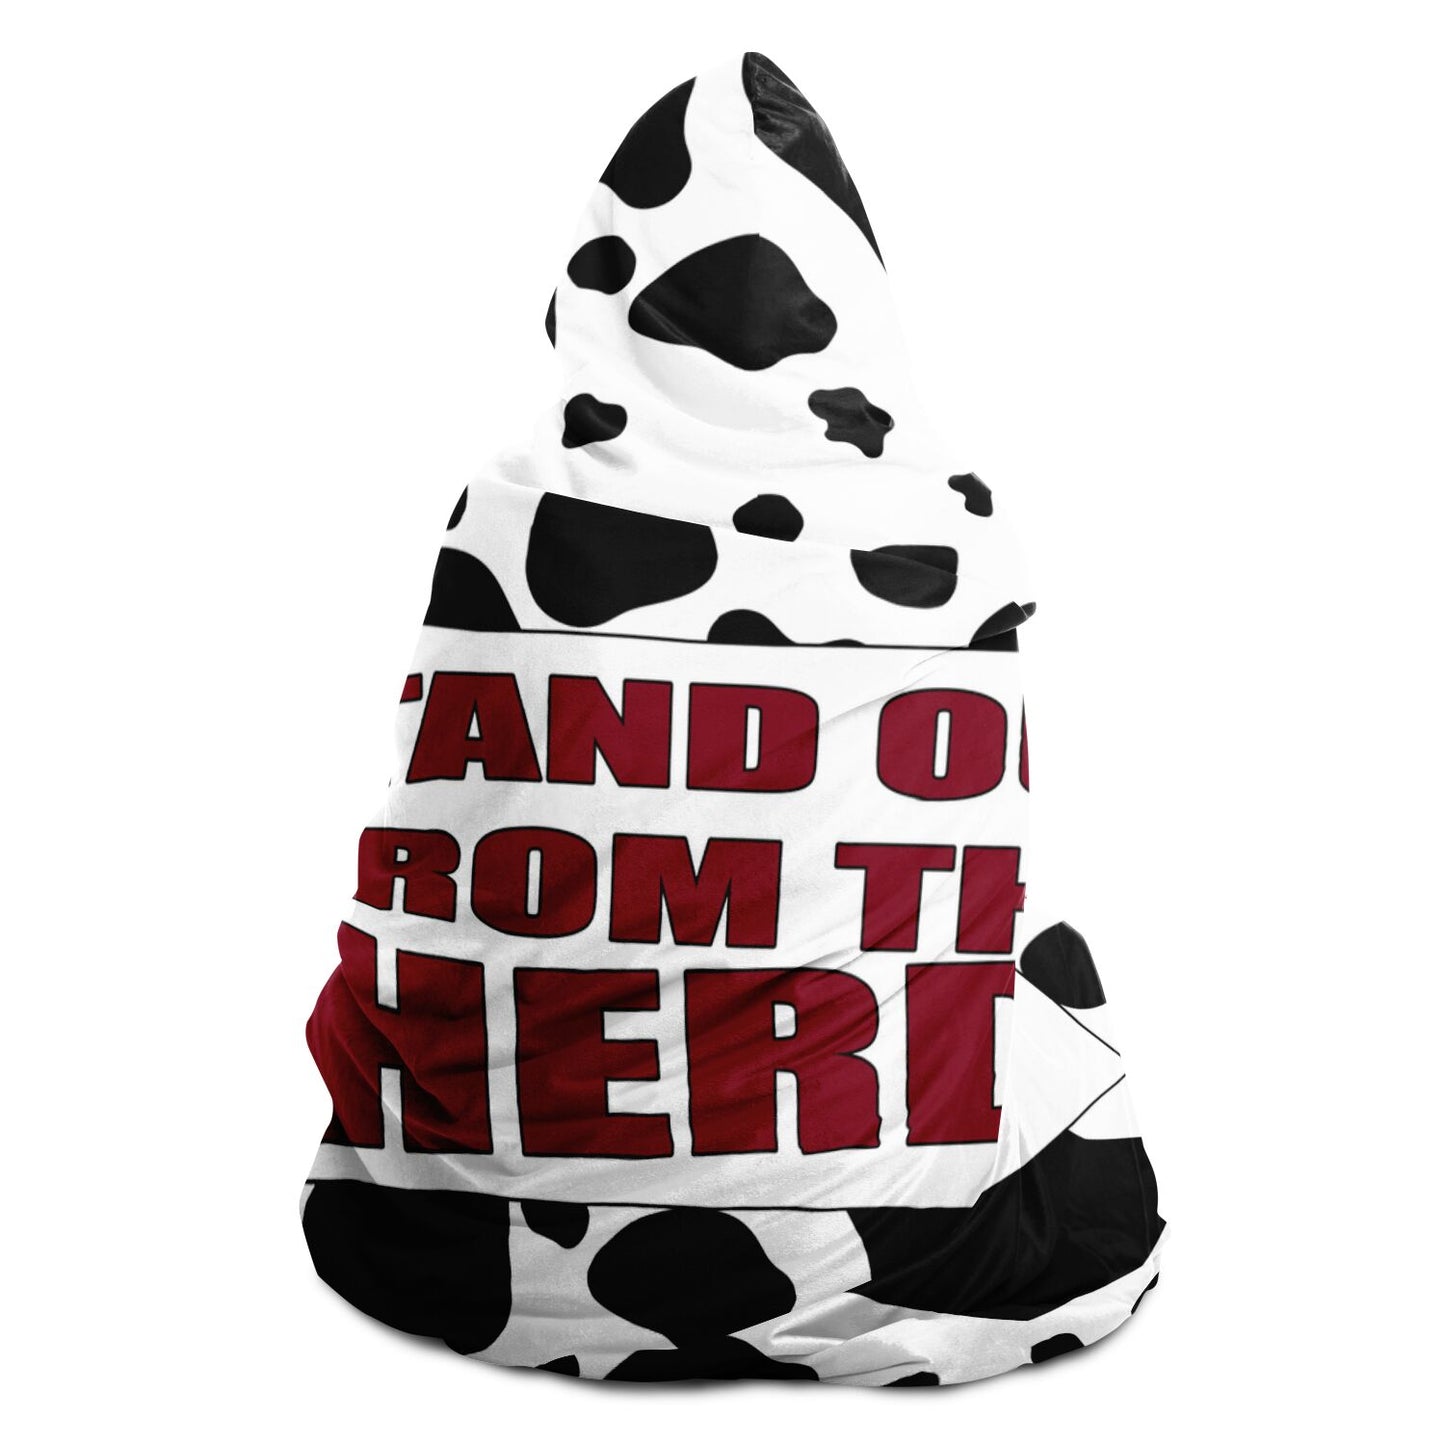 Stand Out from the Herd Hooded Blanket - All Over Print - Sherpa Lined Blanket for Livestock Shows